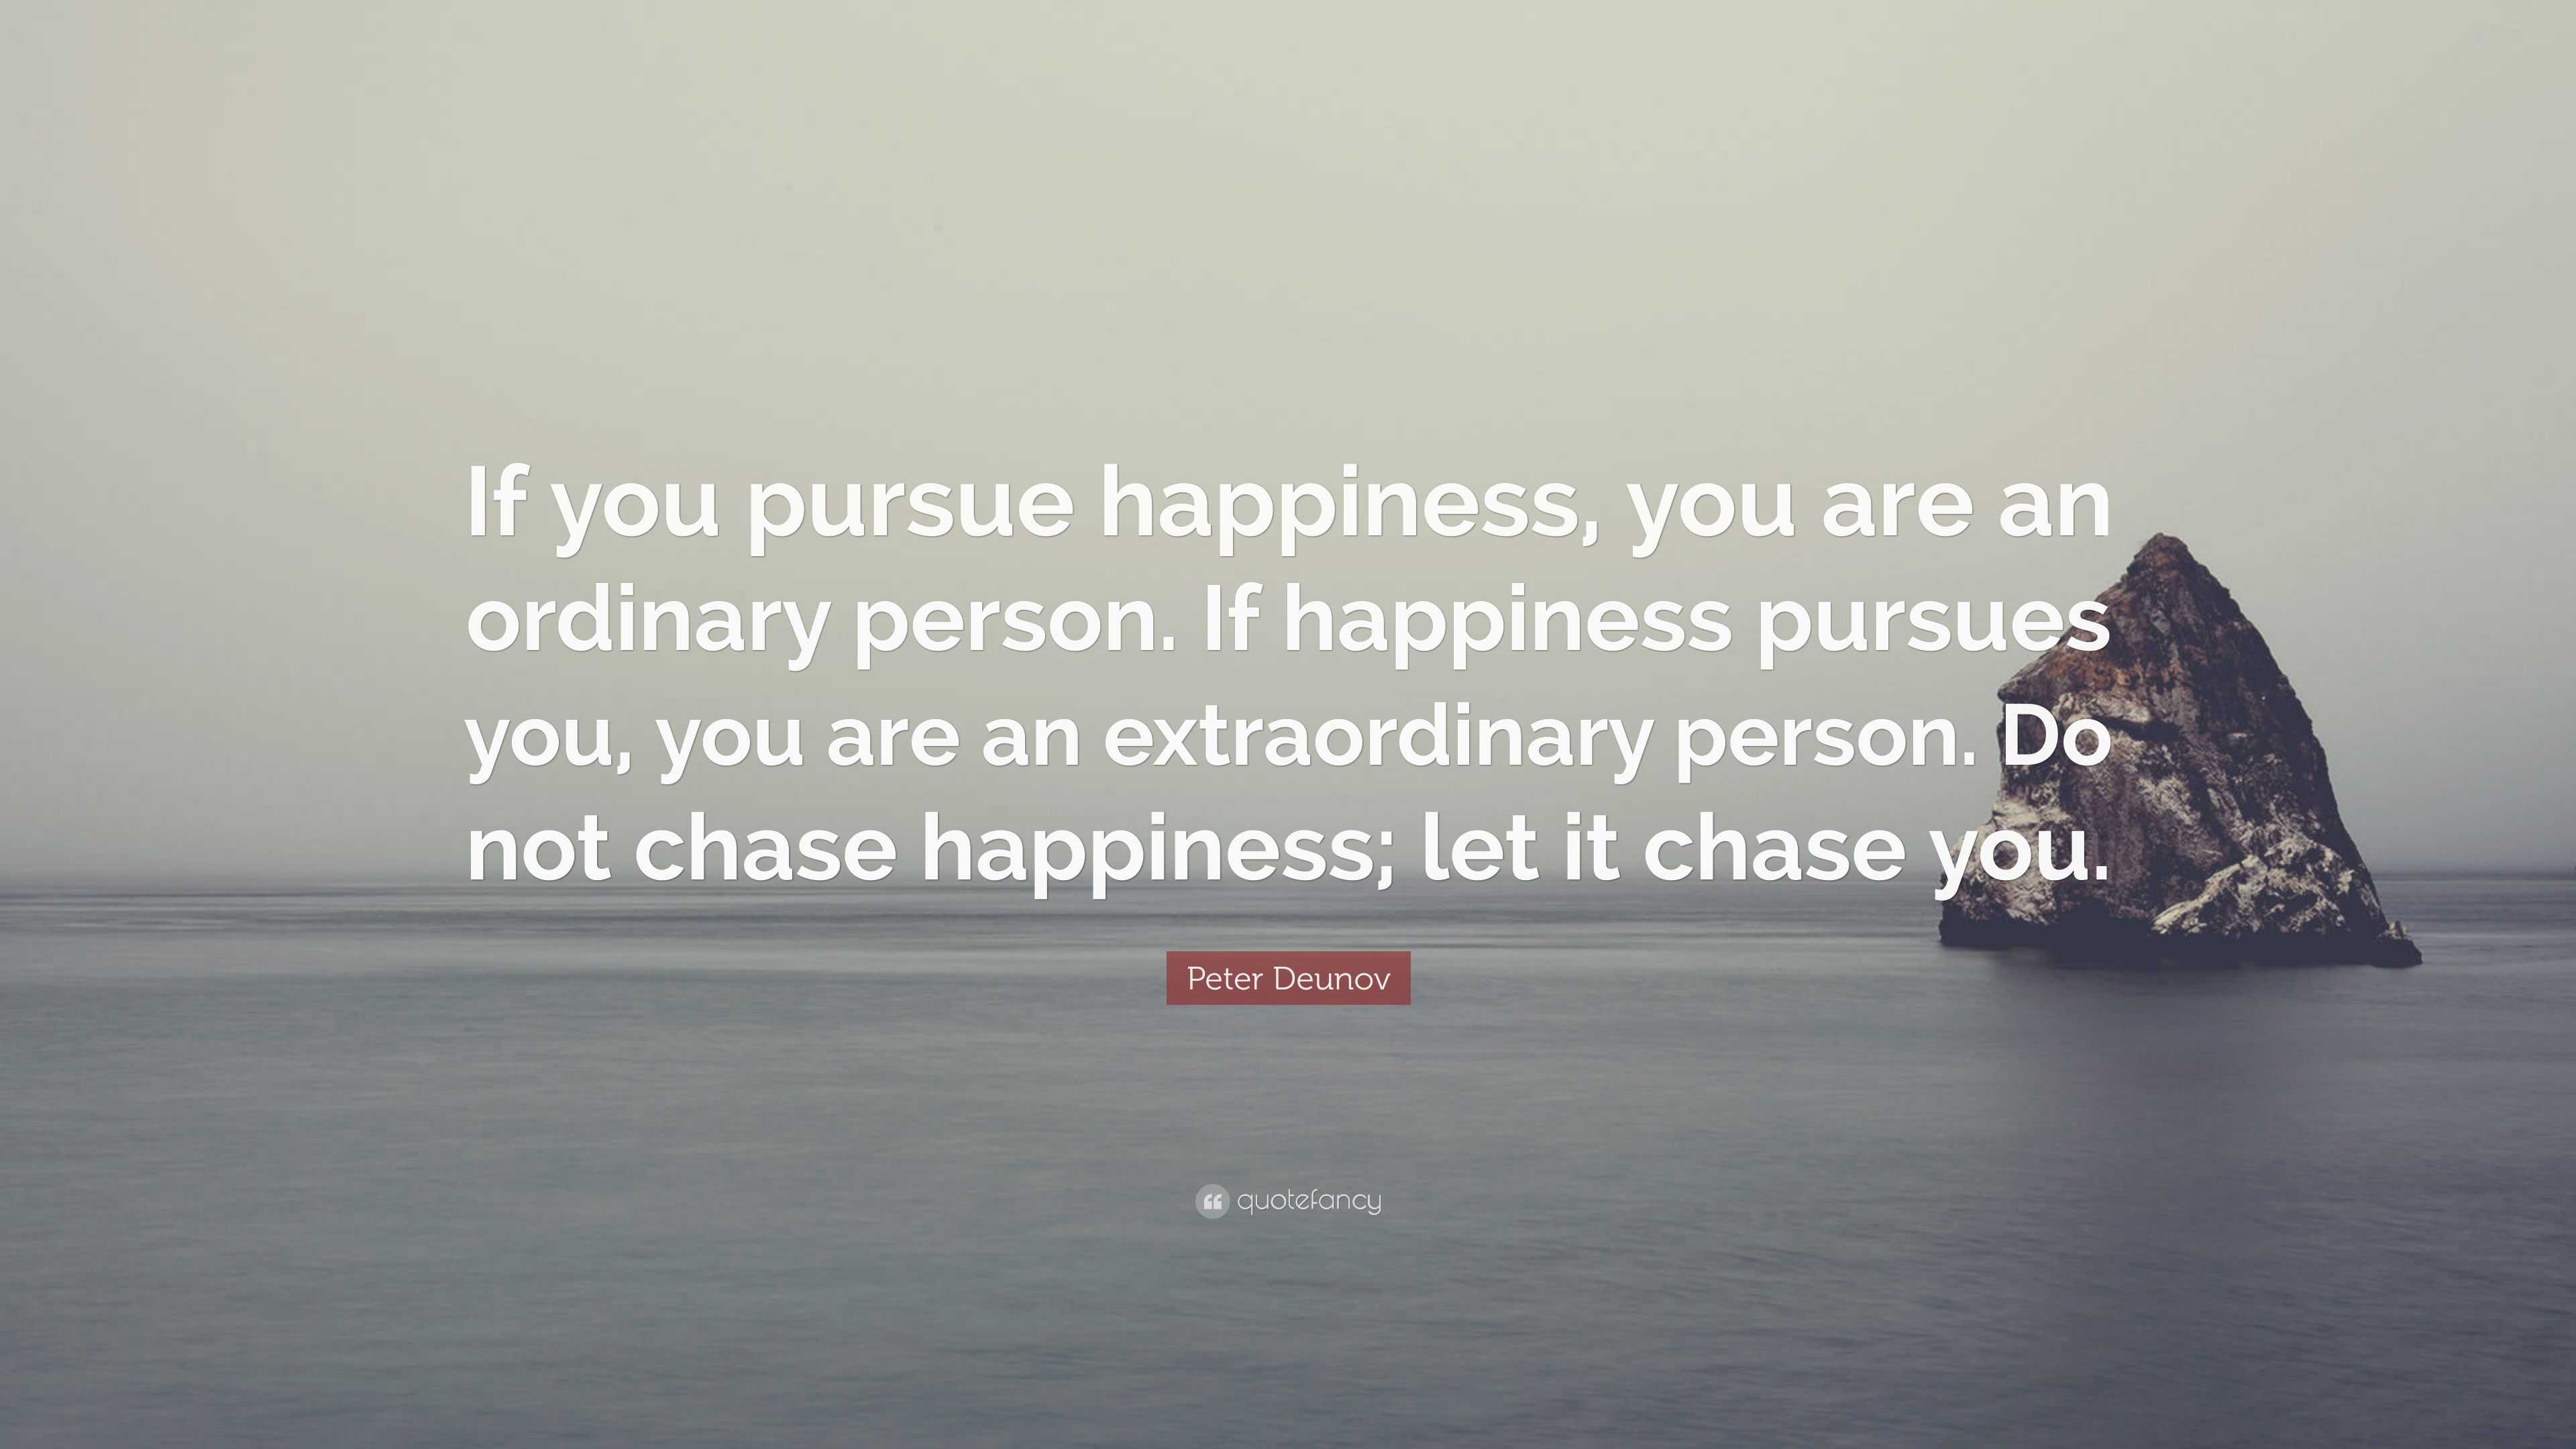 Peter Deunov quote: If you pursue happiness, you are an ordinary person.  If